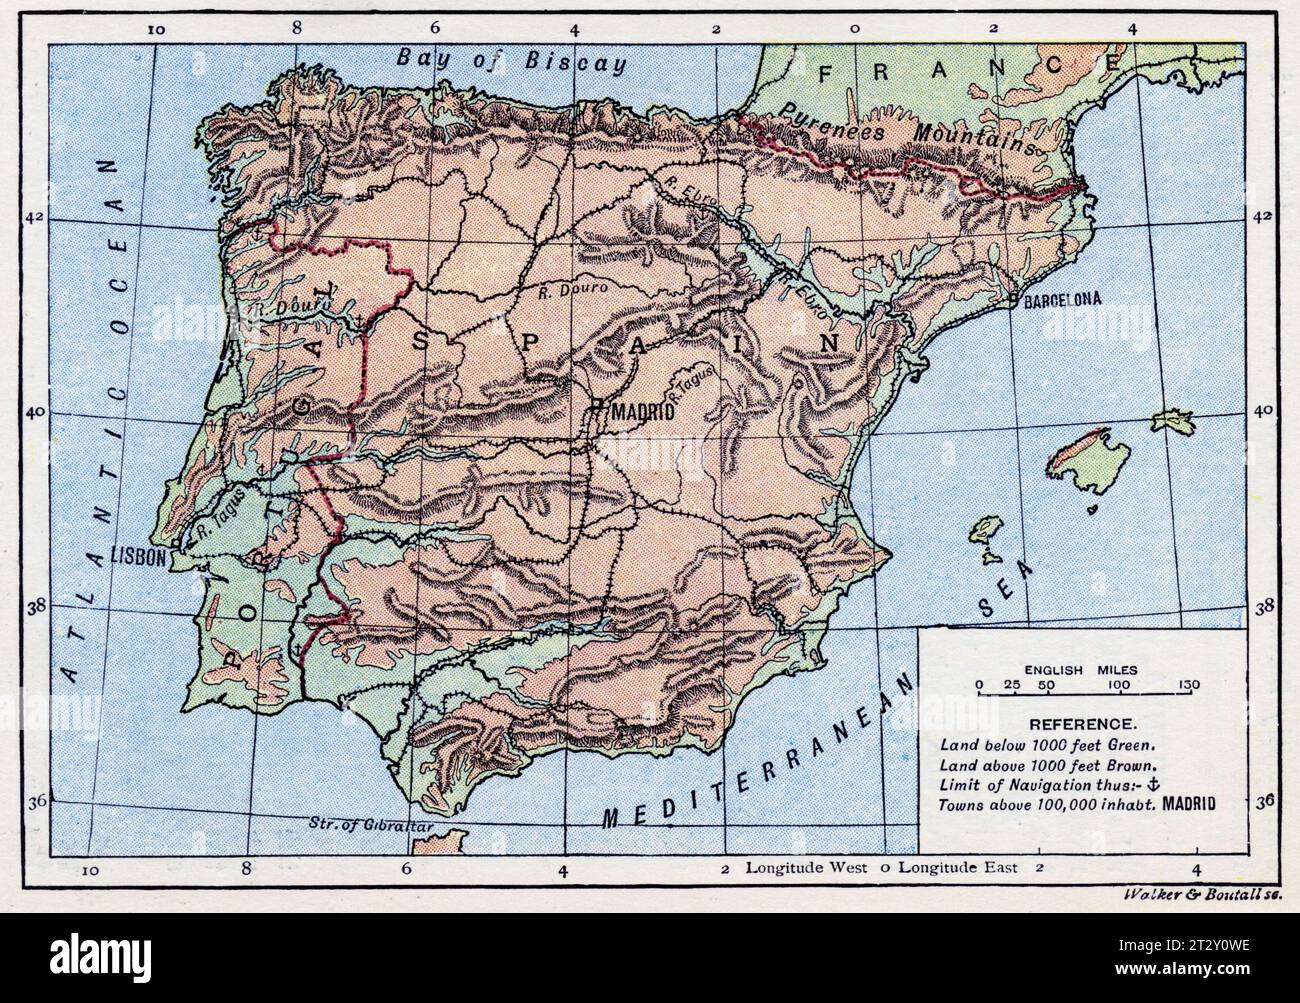 map of Spain circa 1910 from a school geography text book Stock Photo